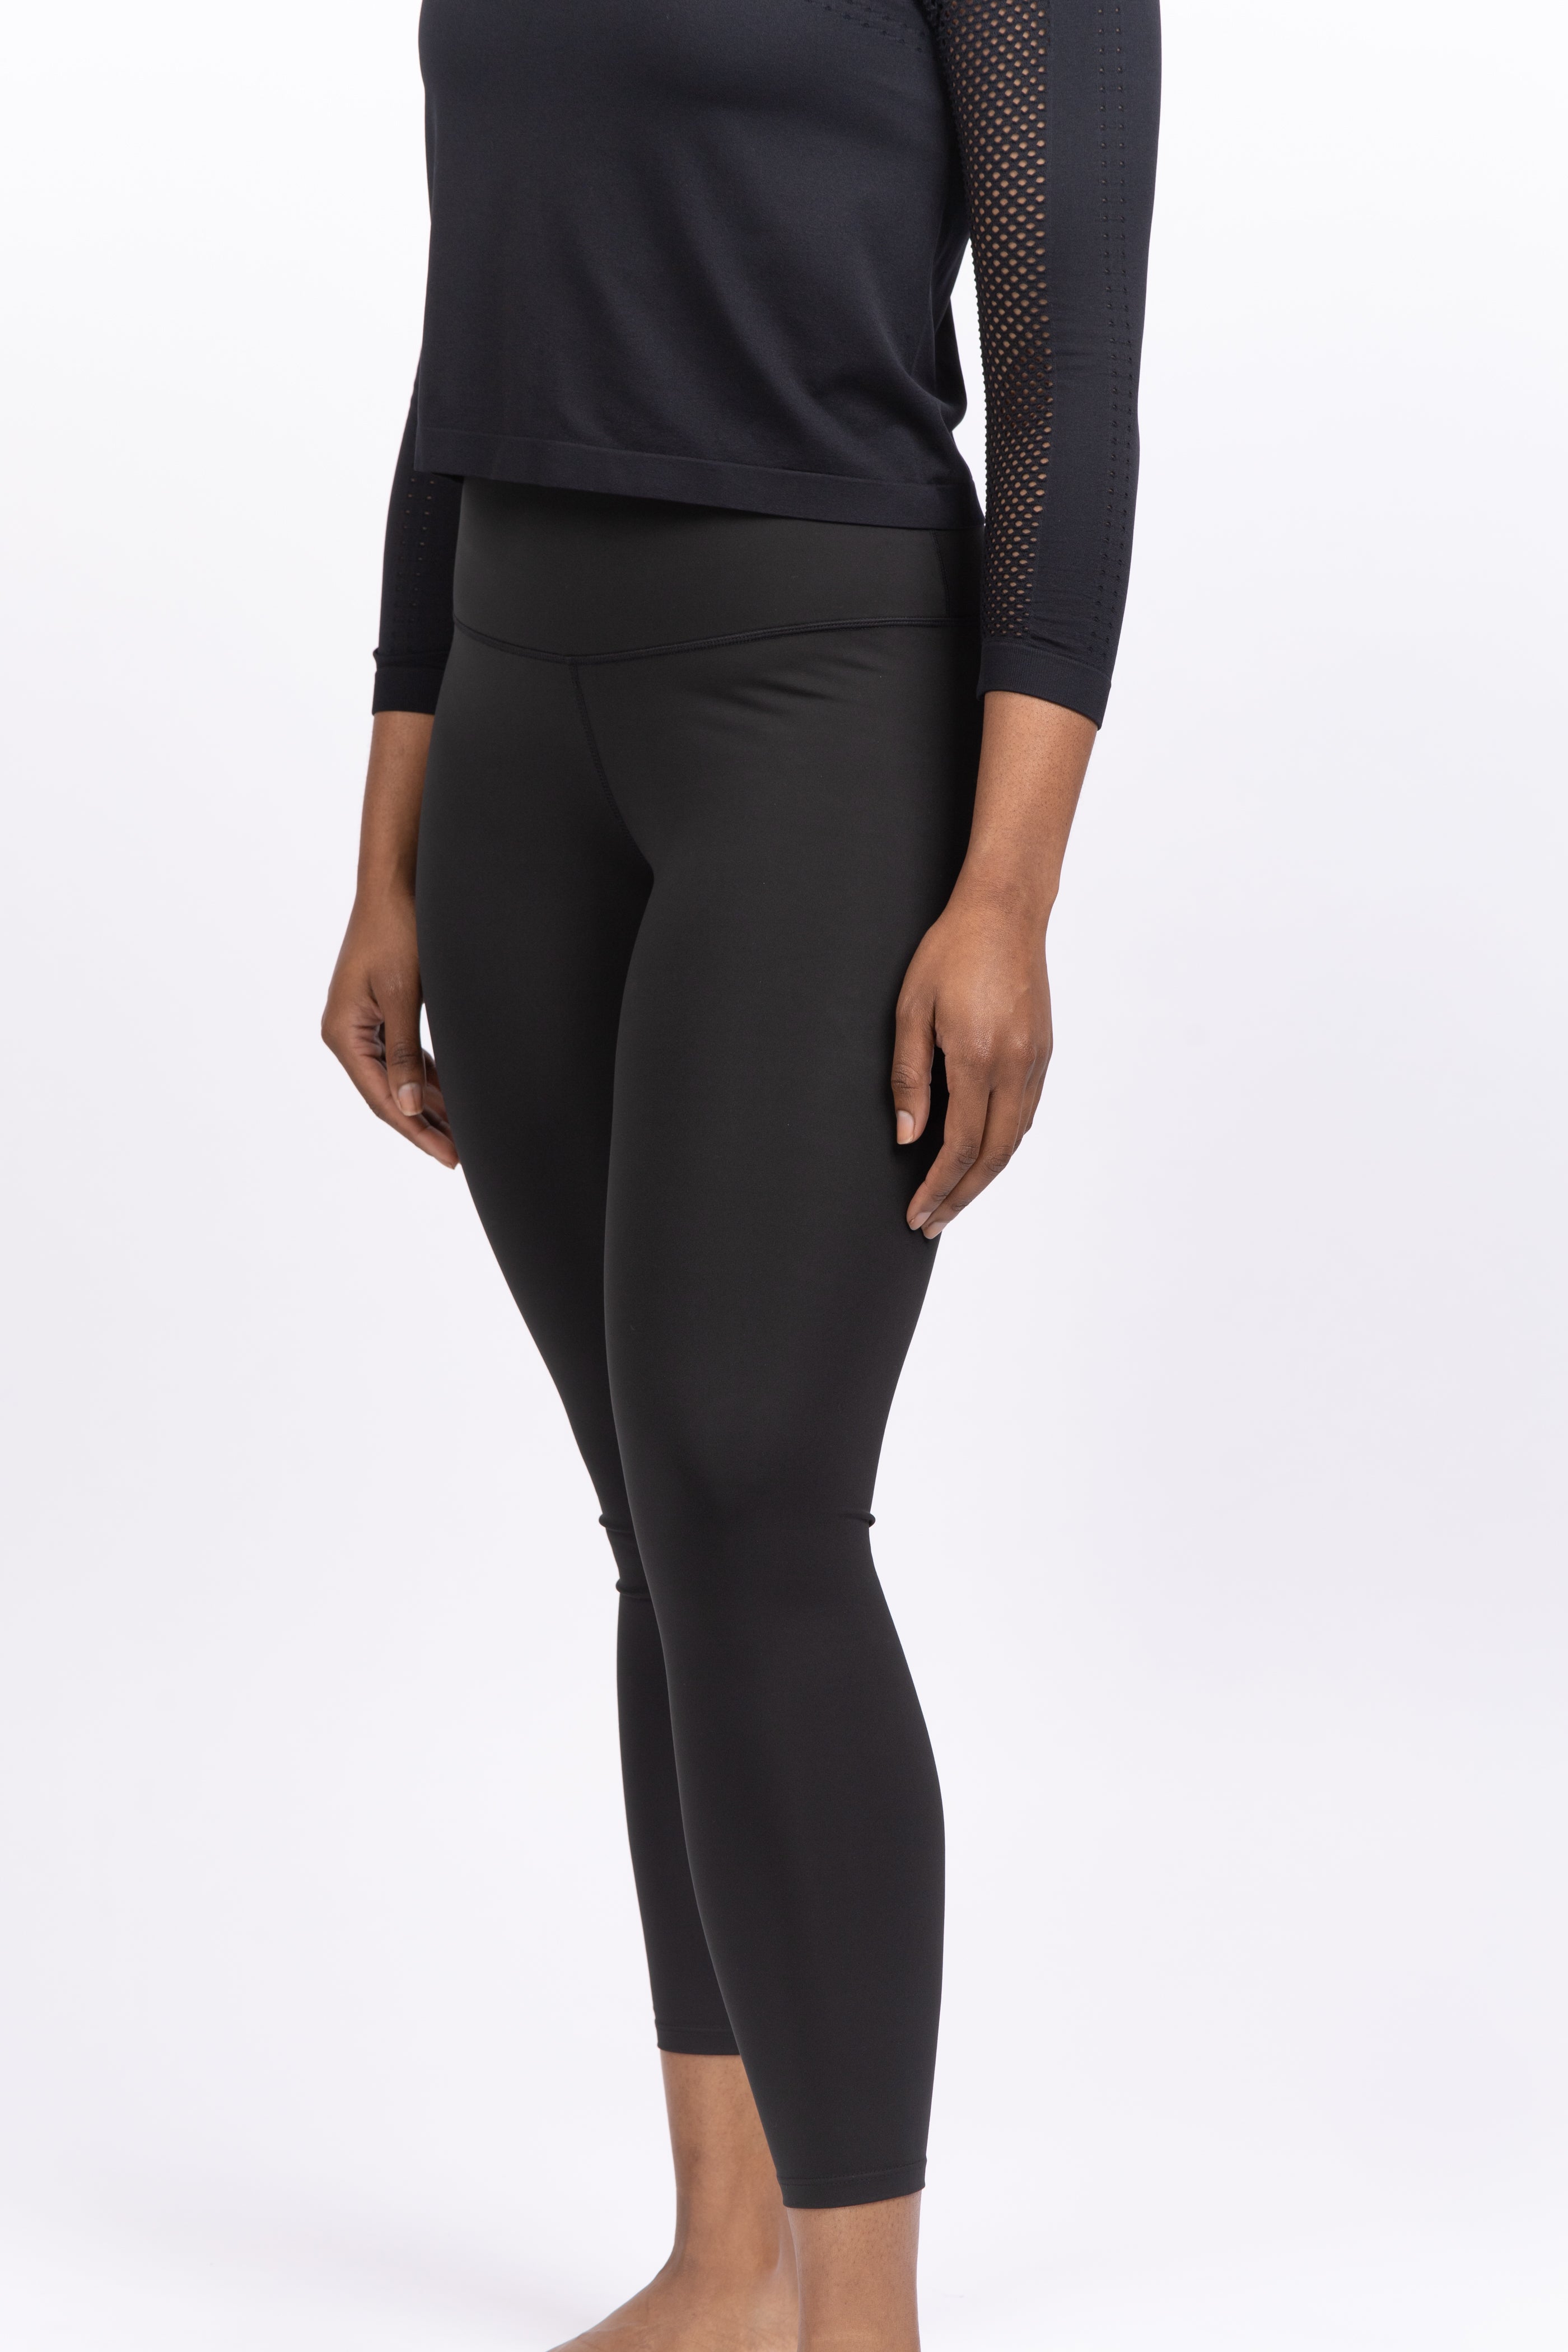 Roll Down Cargo Crop Legging (Style W-448, Black) by Hard Tail